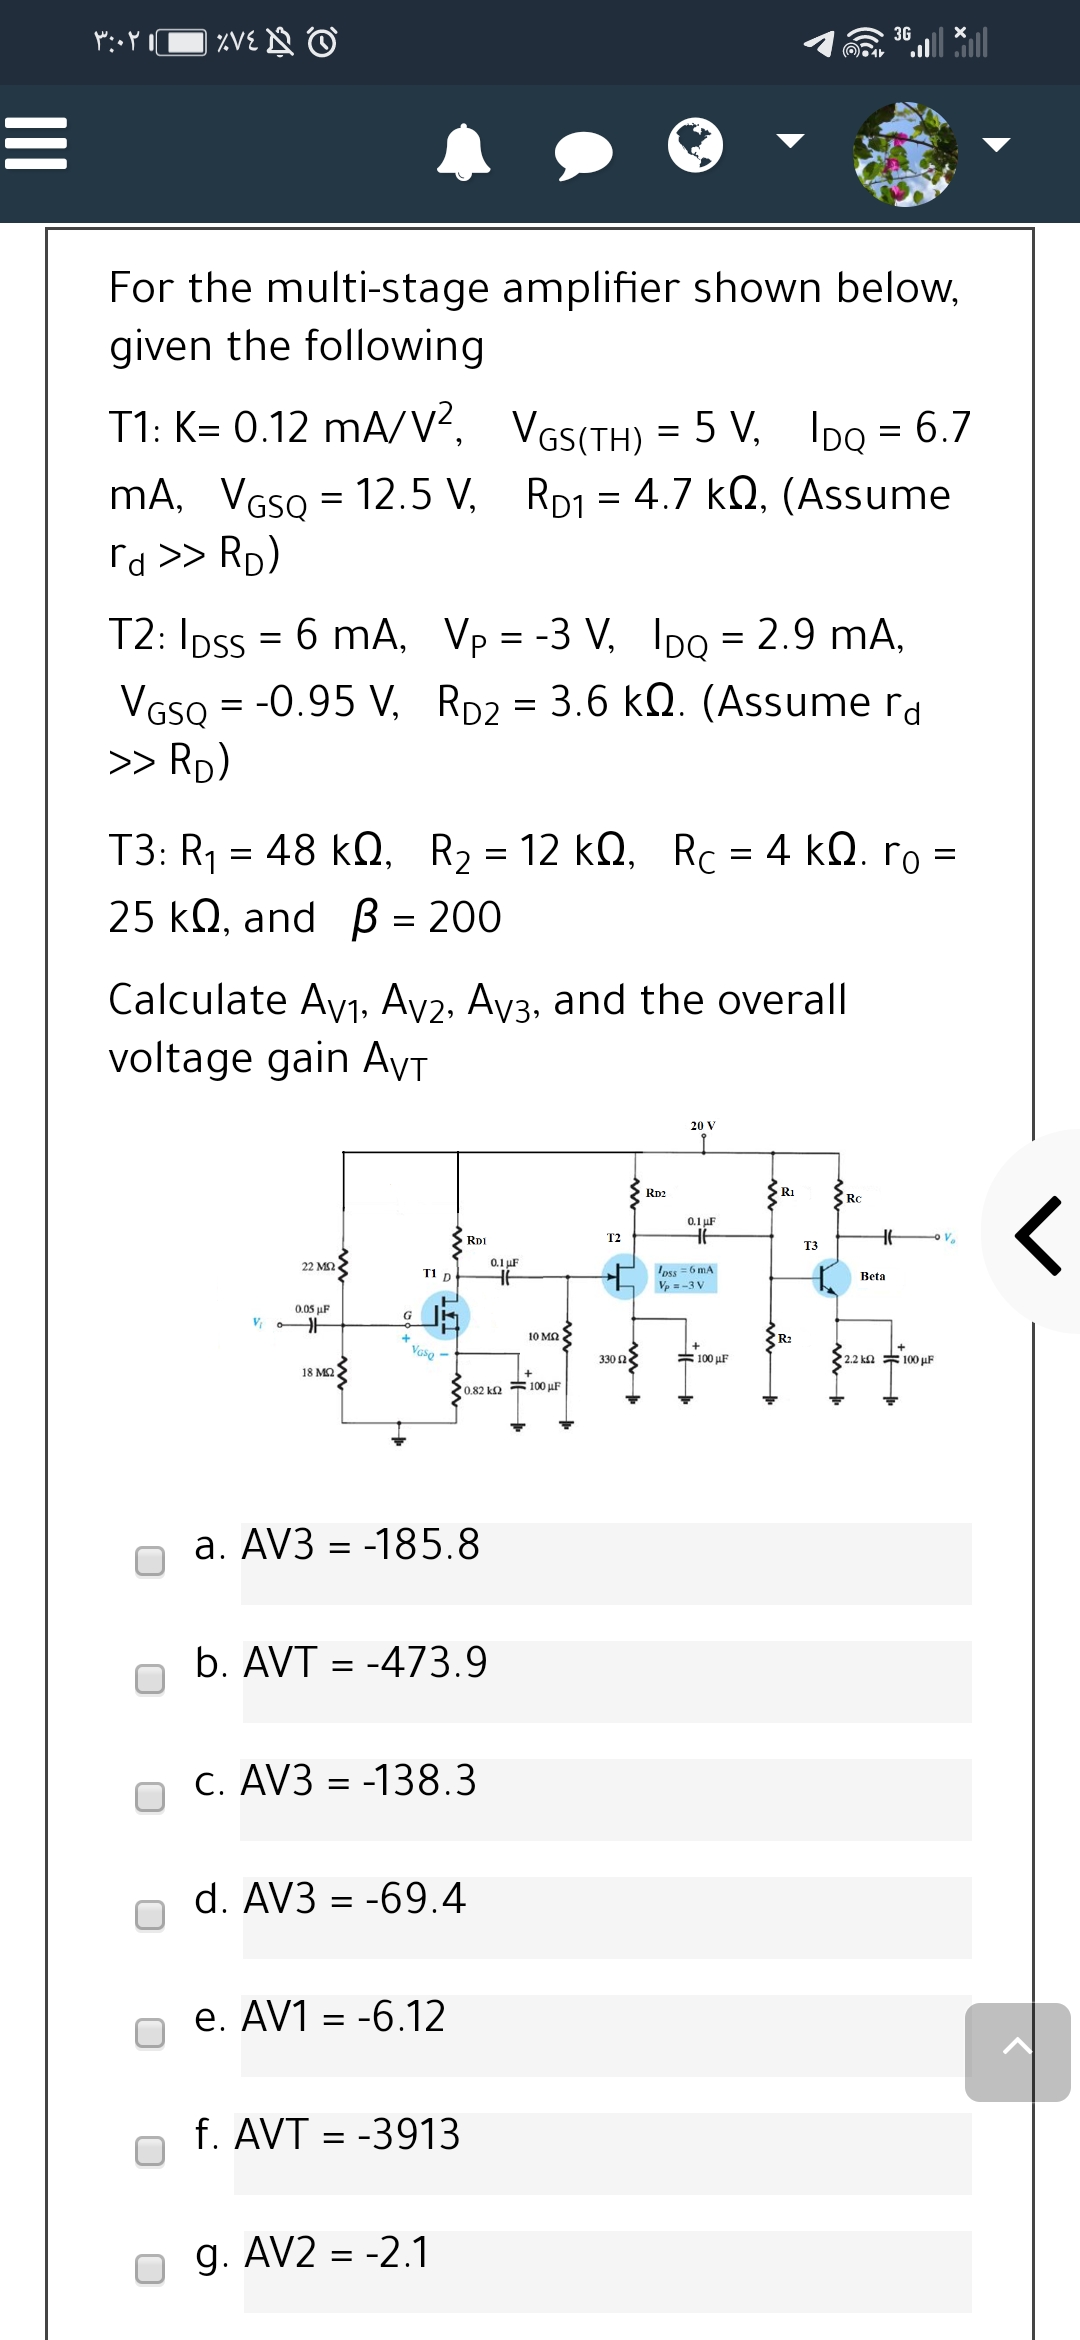 *:Y口XVEN O
3G
For the multi-stage amplifier shown below,
given the following
T1: K= 0.12 mA/V², VGs(TH) = 5 V, IDQ = 6.7
mA, VGSQ = 12.5 V, RD1 = 4.7 kQ, (Assume
rd >> Rp)
T2: Ipss = 6 mA, Vp = -3 V, Ipo = 2.9 mA,
VGSQ = -0.95 V, RD2 = 3.6 kQ. (Assume rd
>> Rp)
T3: R1 = 48 kN,
, R2 = 12 k0, Rc = 4 kQ. ro =
25 kQ, and B = 200
Calculate Ayj, Ay2, Ay3, and the overall
voltage gain AyT
20 V
Rp2
R1
RC
く
0.1 uF
RDI
T2
Va
T3
22 ΜΩ.
0.1 µF
oss = 6 mA
Vp = -3 V
T1 D
Beta
0.05 uF
G
+
10 MQ
R2
+
Vase
330 n
=100 uF
2.2 ka * 100 µF
18 MQ
0.82 ka 100 µF
a. AV3 = -185.8
b. AVT = -473.9
C. AV3 = -138.3
d. AV3 = -69.4
e. AV1 = -6.12
f. AVT = -3913
g. AV2 = -2.1
